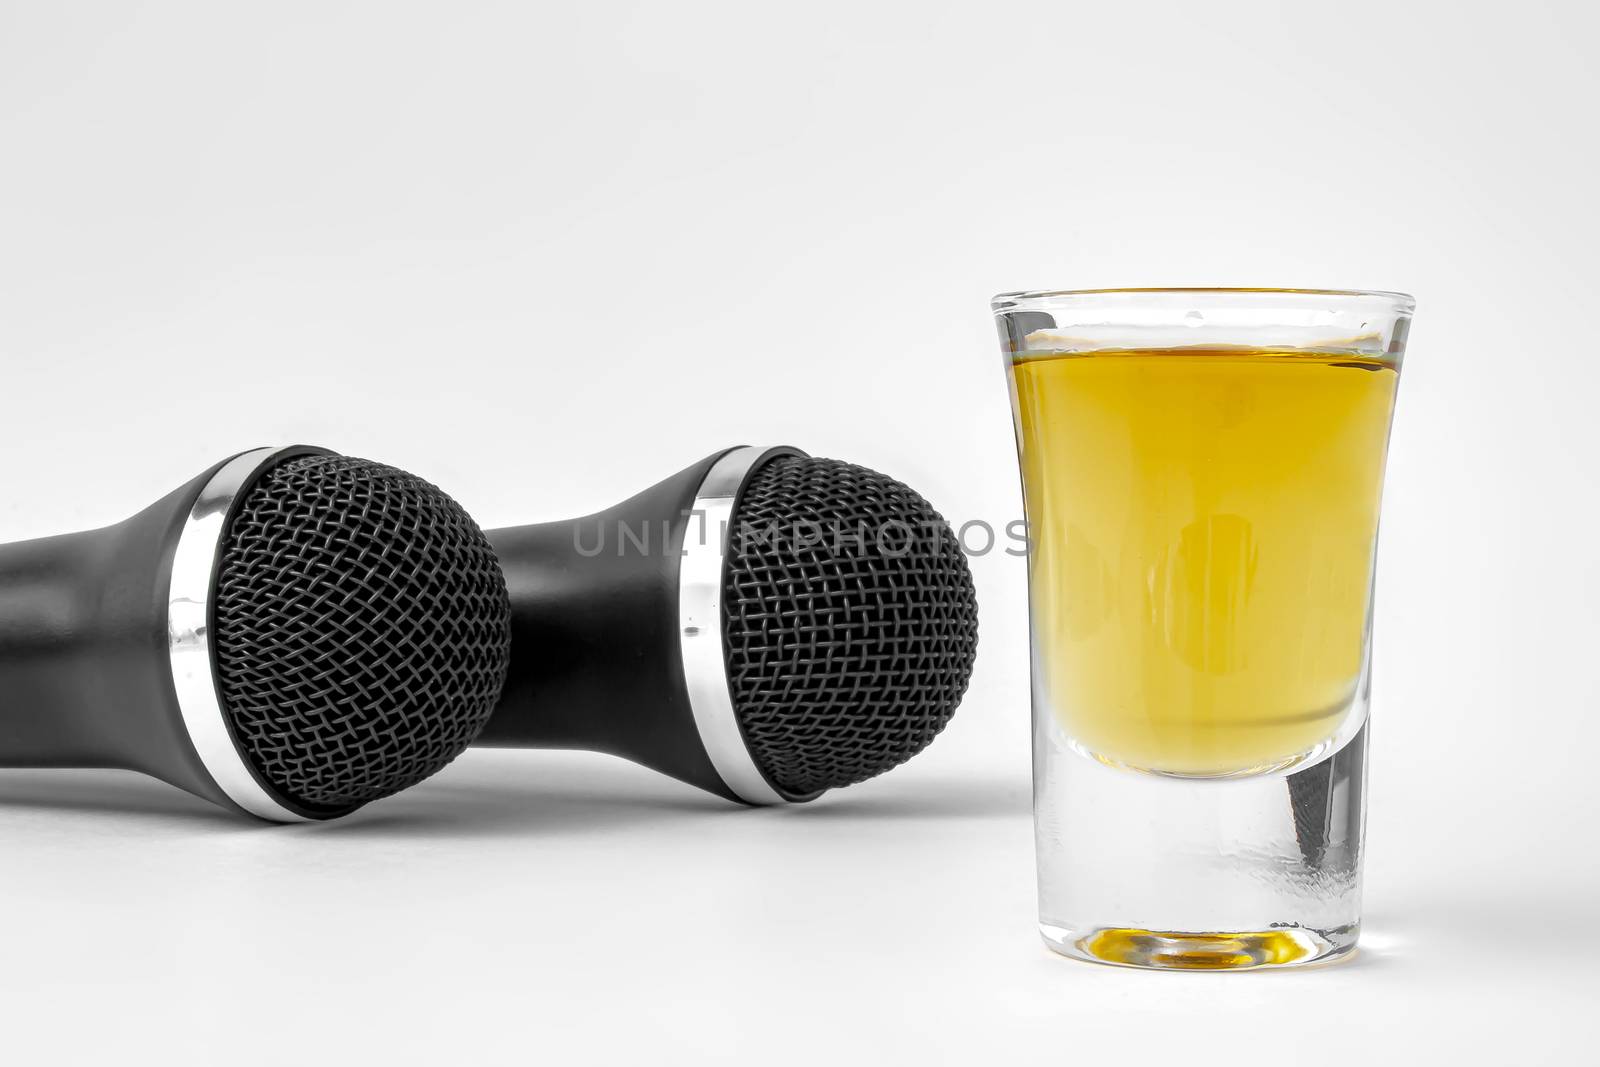 A shoot glass with liquor and two karaoke microphones on a white background by oasisamuel